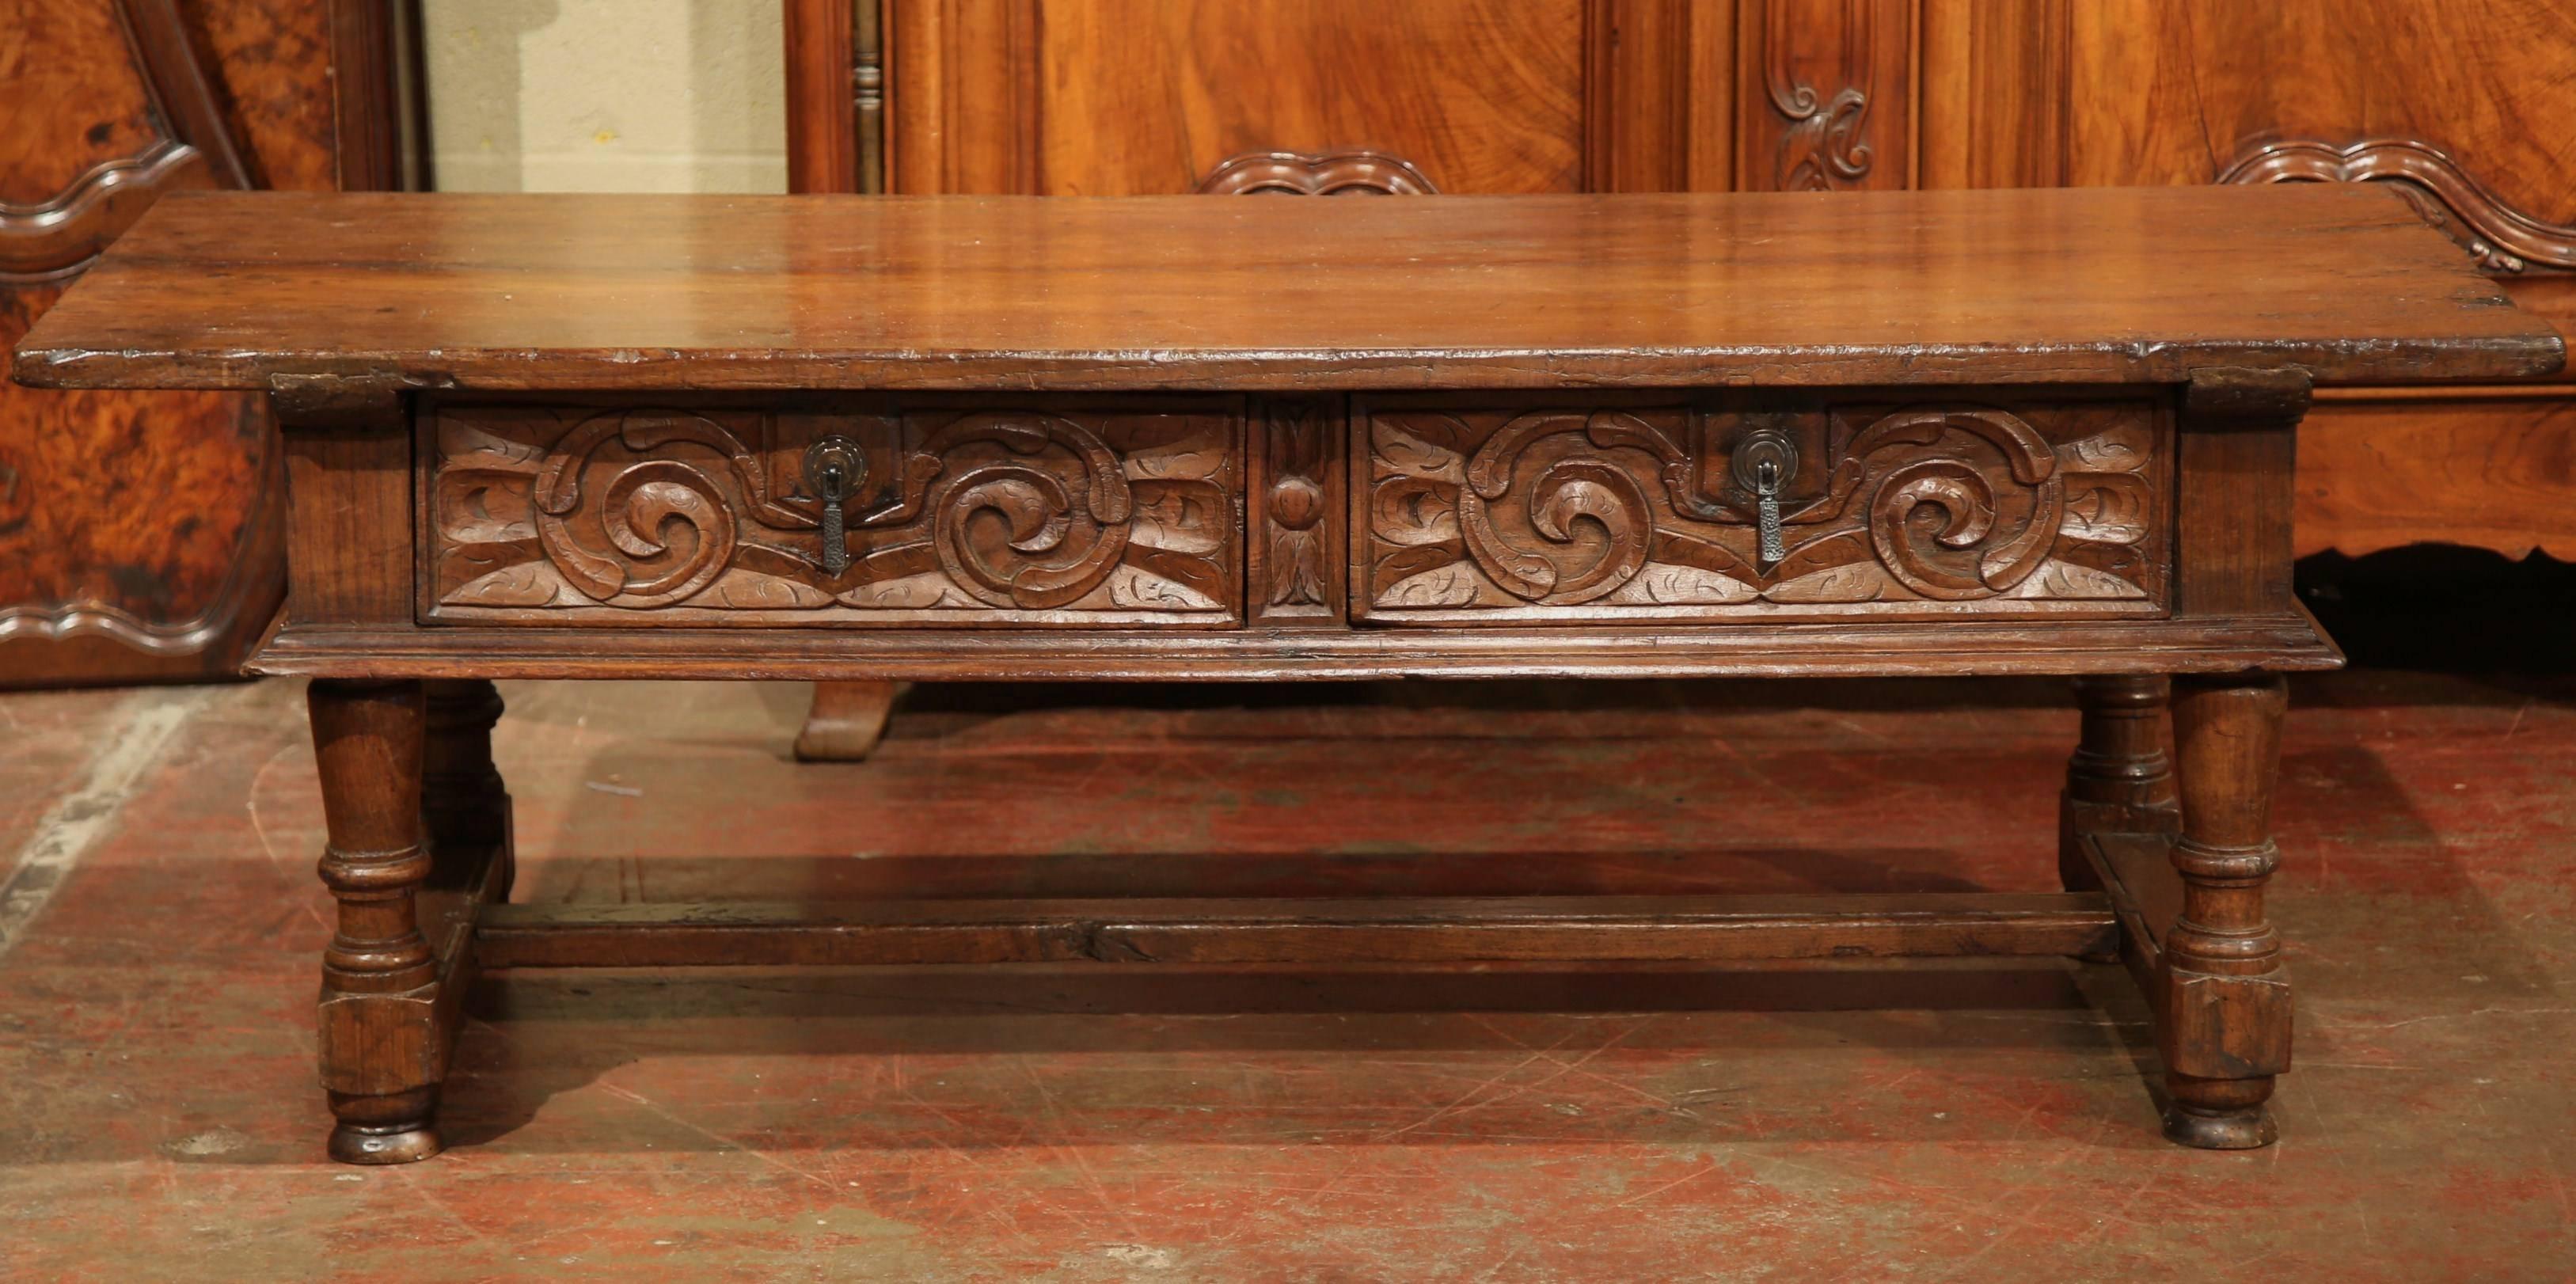 This elegant, chestnut antique coffee table was carved in the Southern mountains of France, circa 1820. Intricately carved on all four sides, this cocktail table features four turned legs, a bottom stretcher and two drawers across the front with